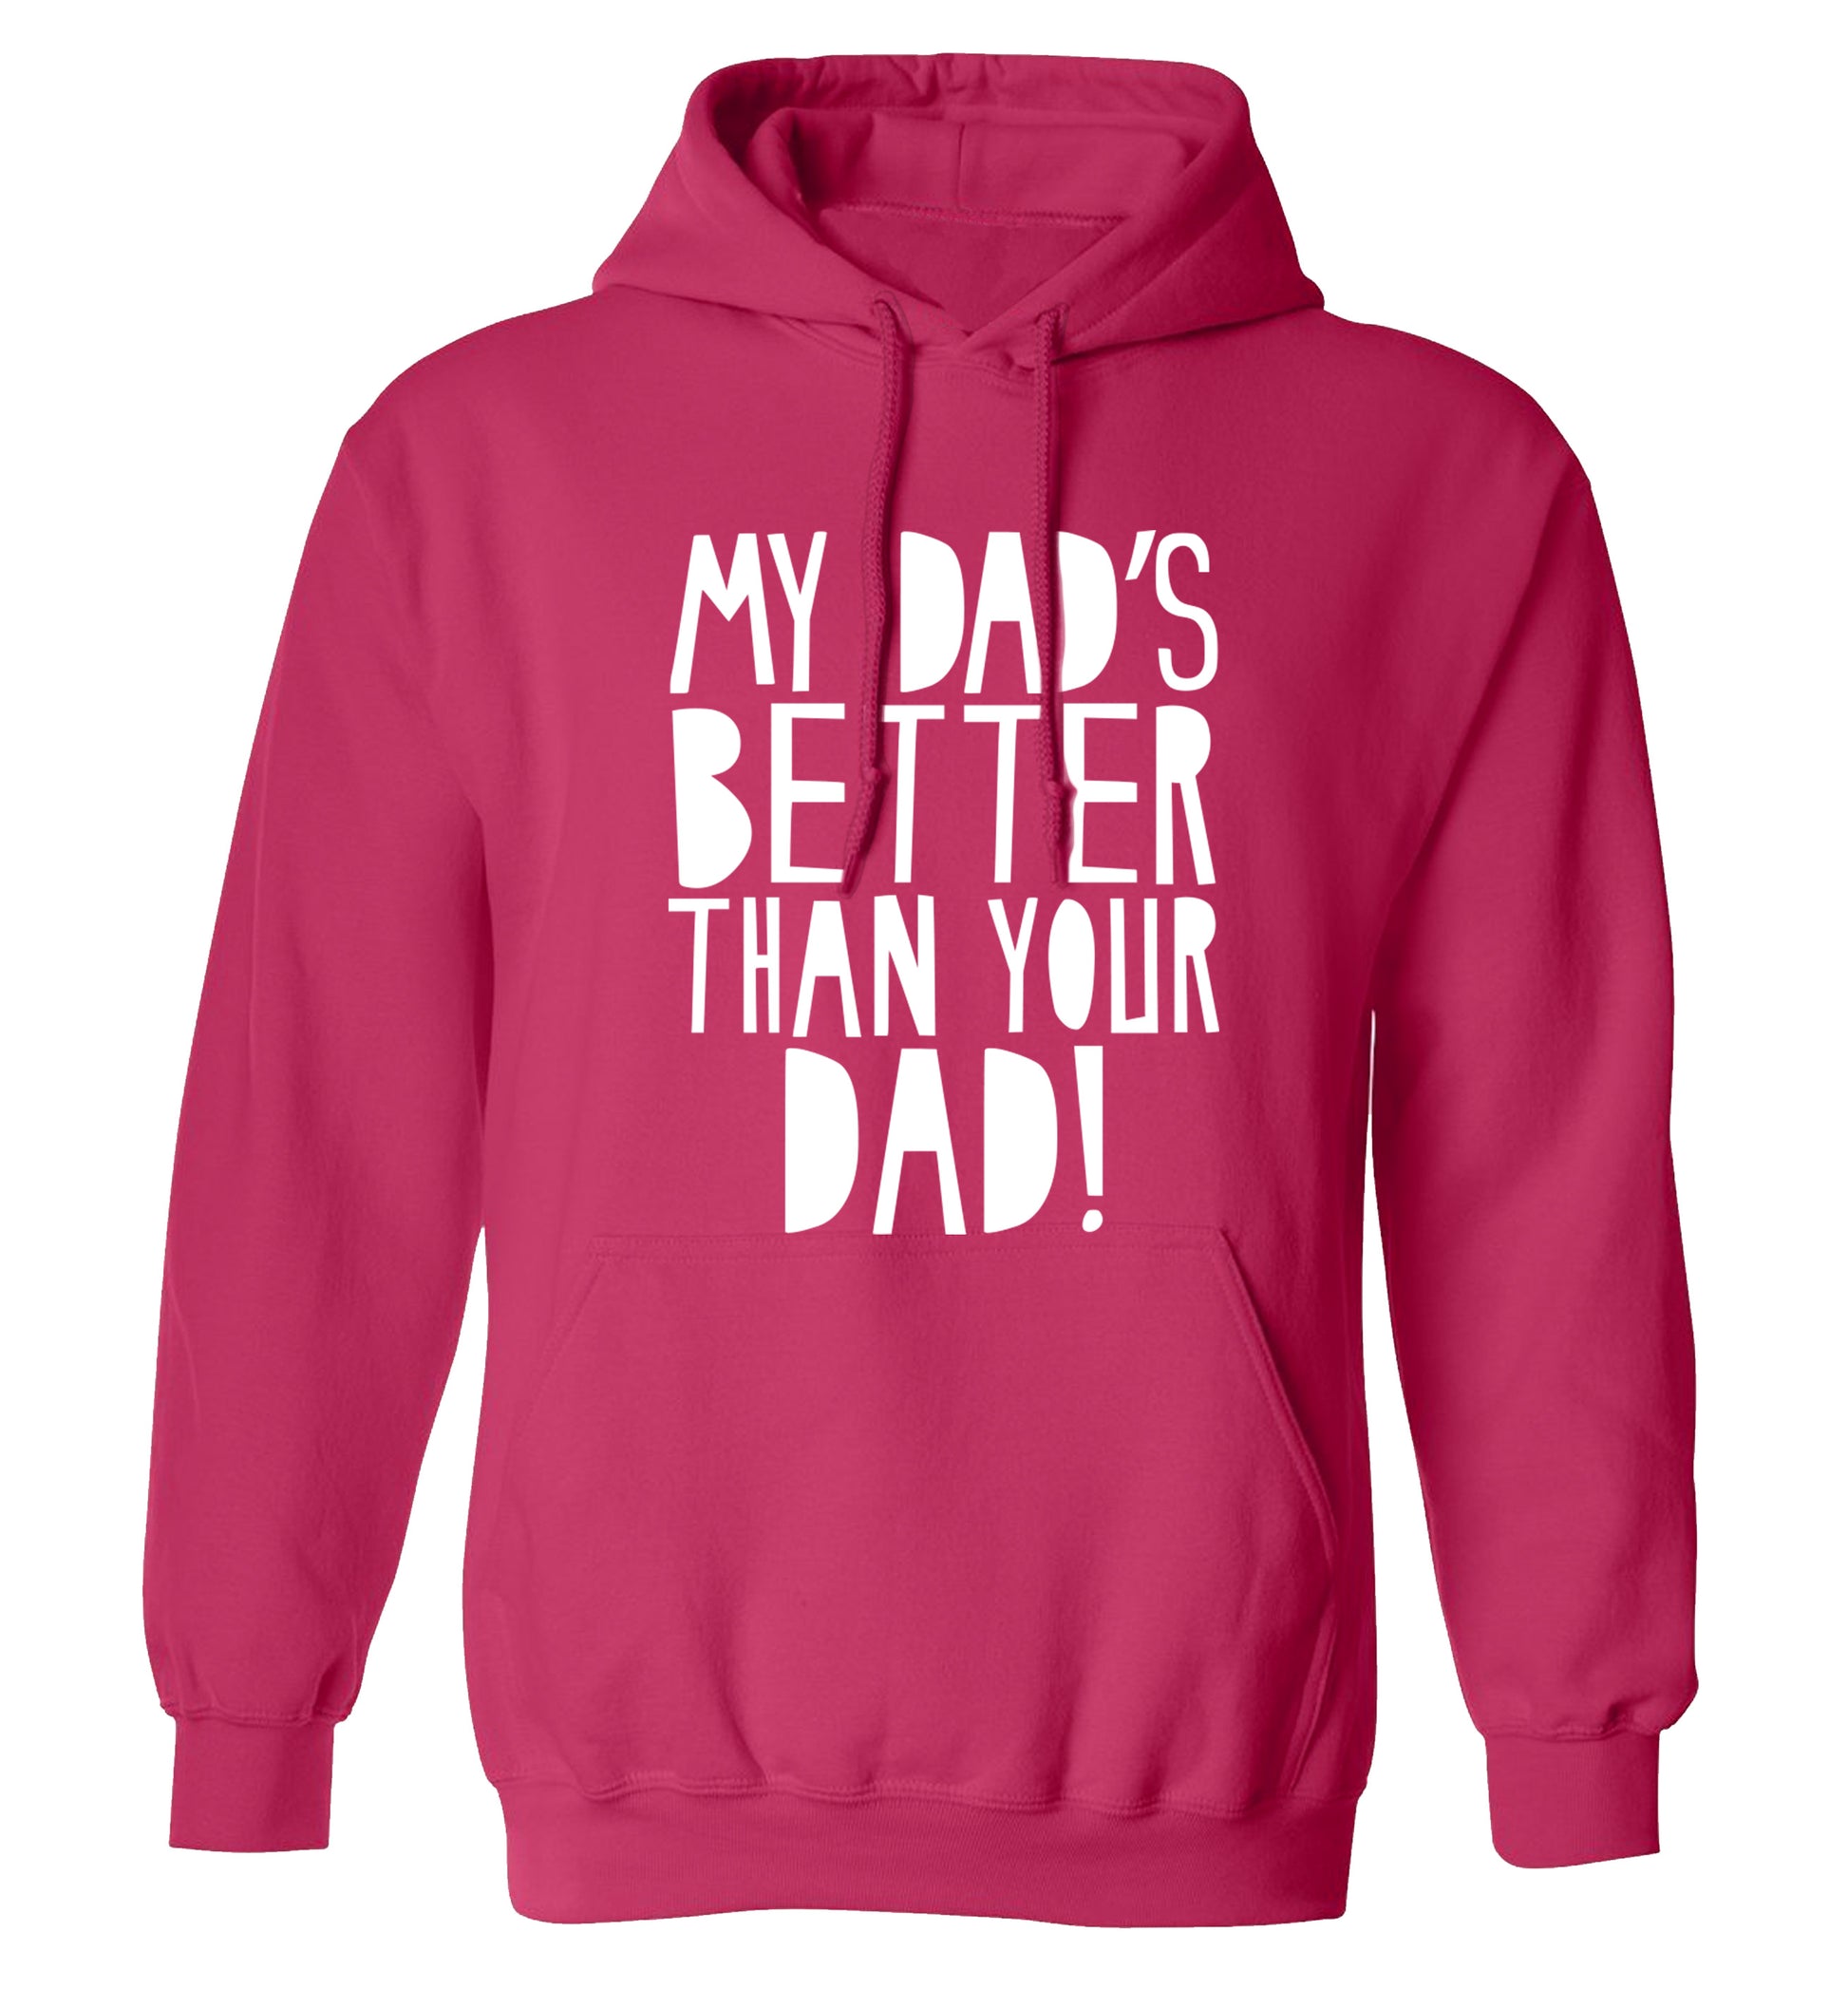 My dad's better than your dad adults unisex pink hoodie 2XL